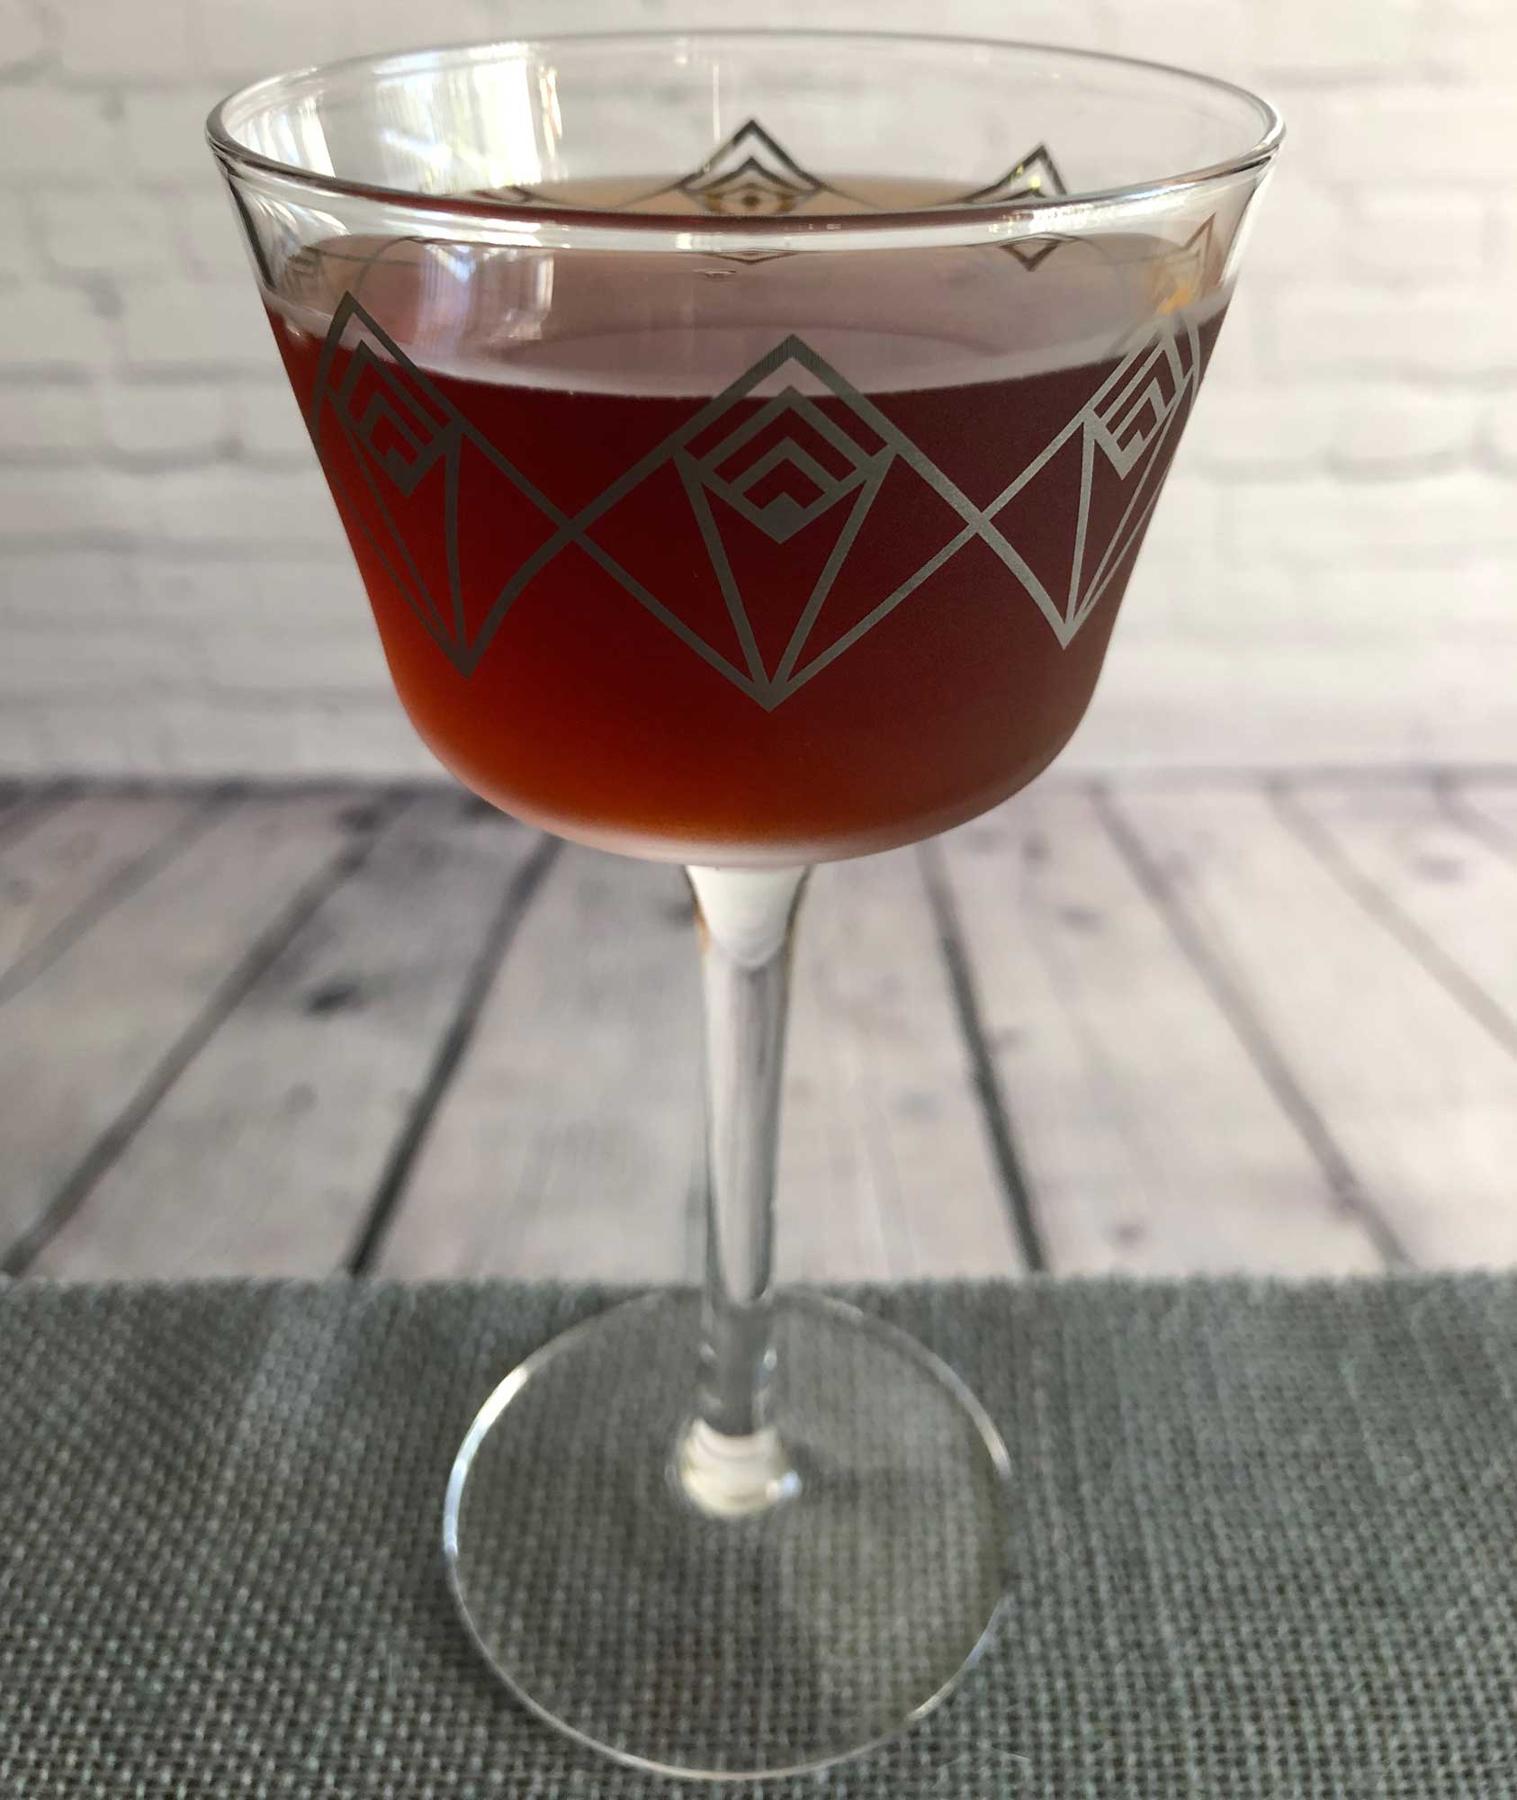 An example of the Navy Cut Shim, the mixed drink (drink), by Bob Herczeg, Sur-Lie, Maine, featuring Tresmontaine “tabacal” Rancio, Cocchi Dopo Teatro Vermouth Amaro, Aperitivo Cappelletti, Smith & Cross Traditional Jamaica Rum, orange bitters, and Laphroaig 10 Year Single Malt Scotch; photo by Lee Edwards